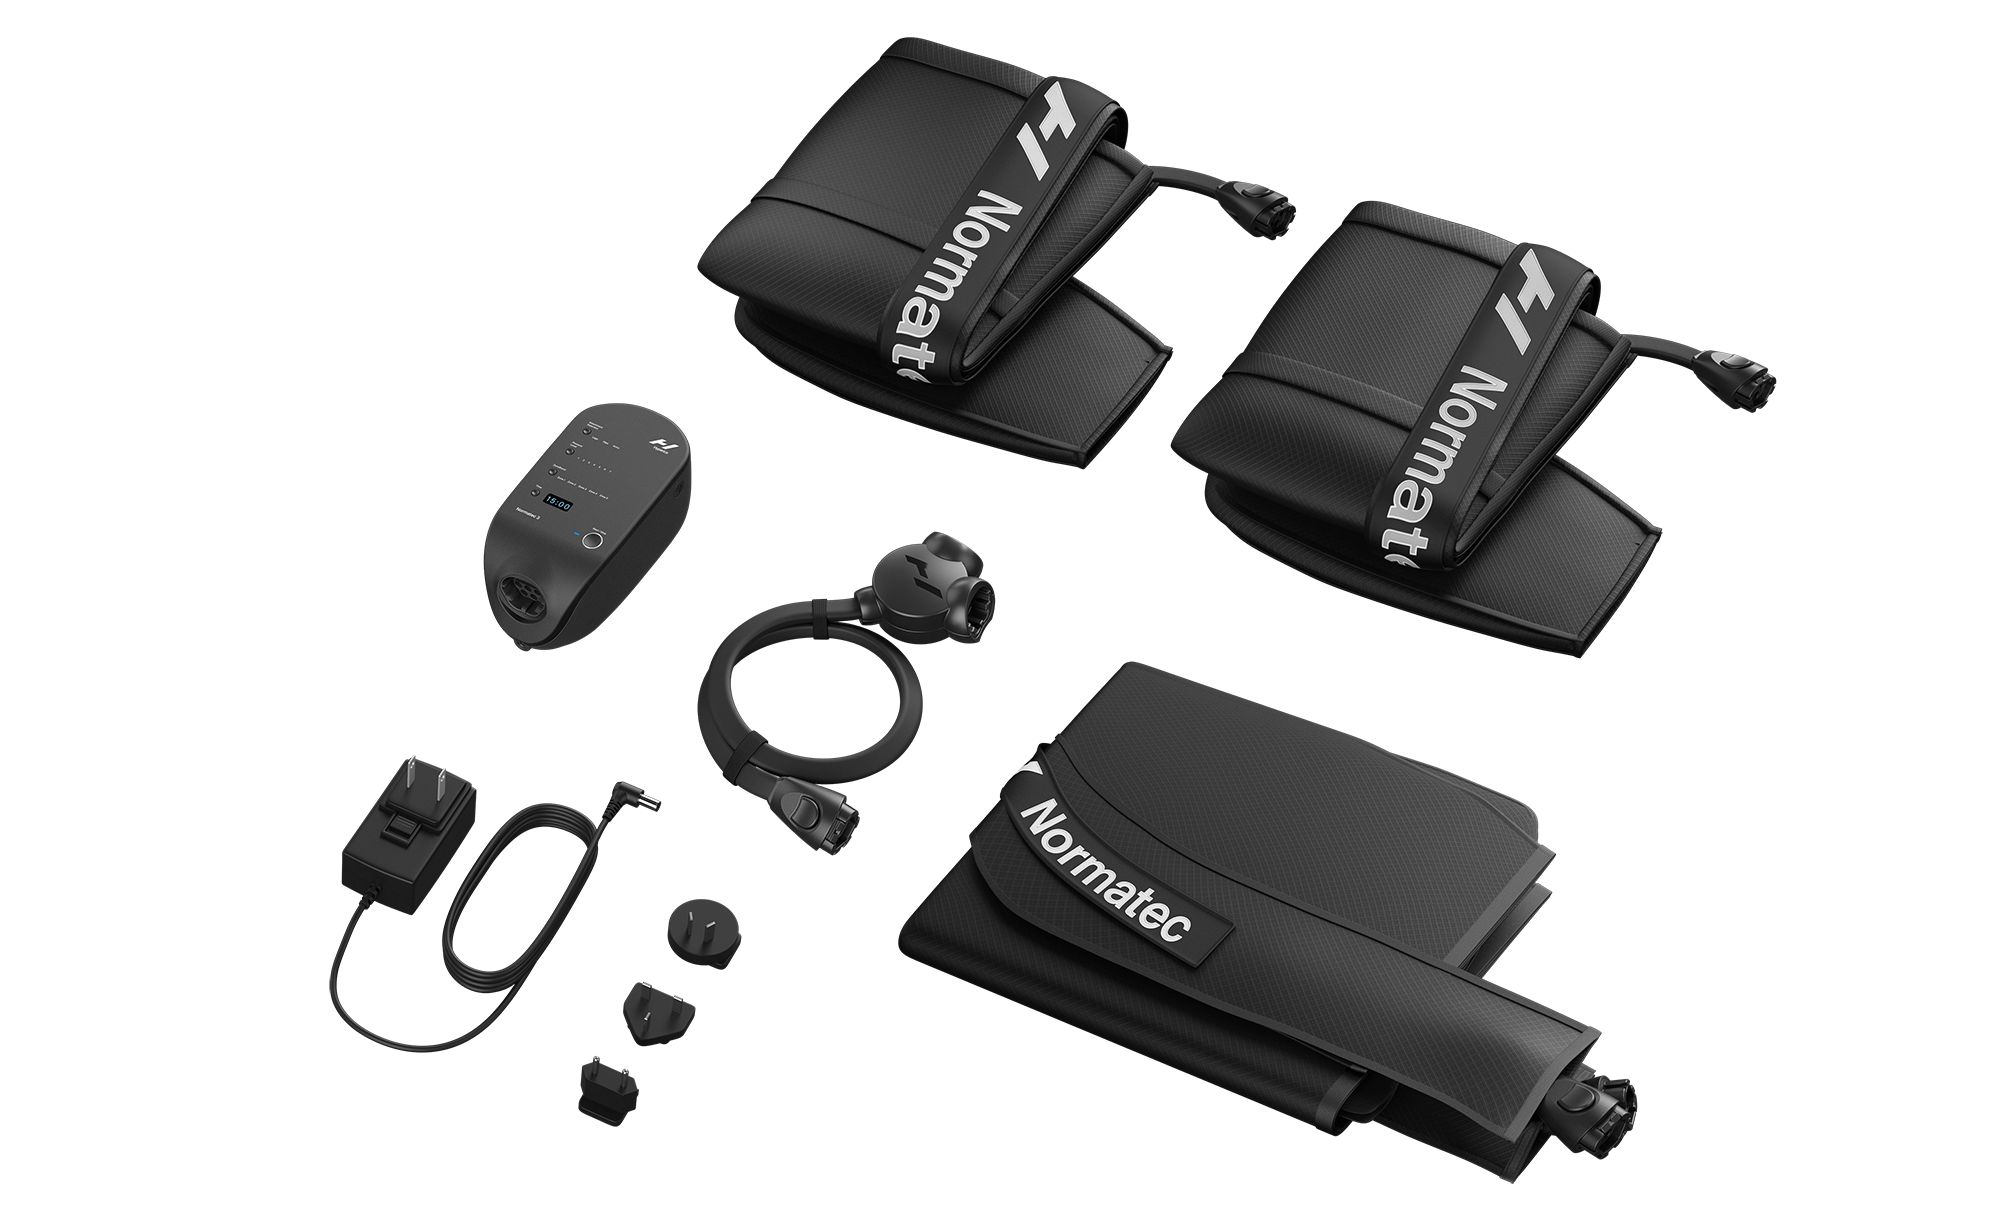 Normatec 3 Lower Body Features